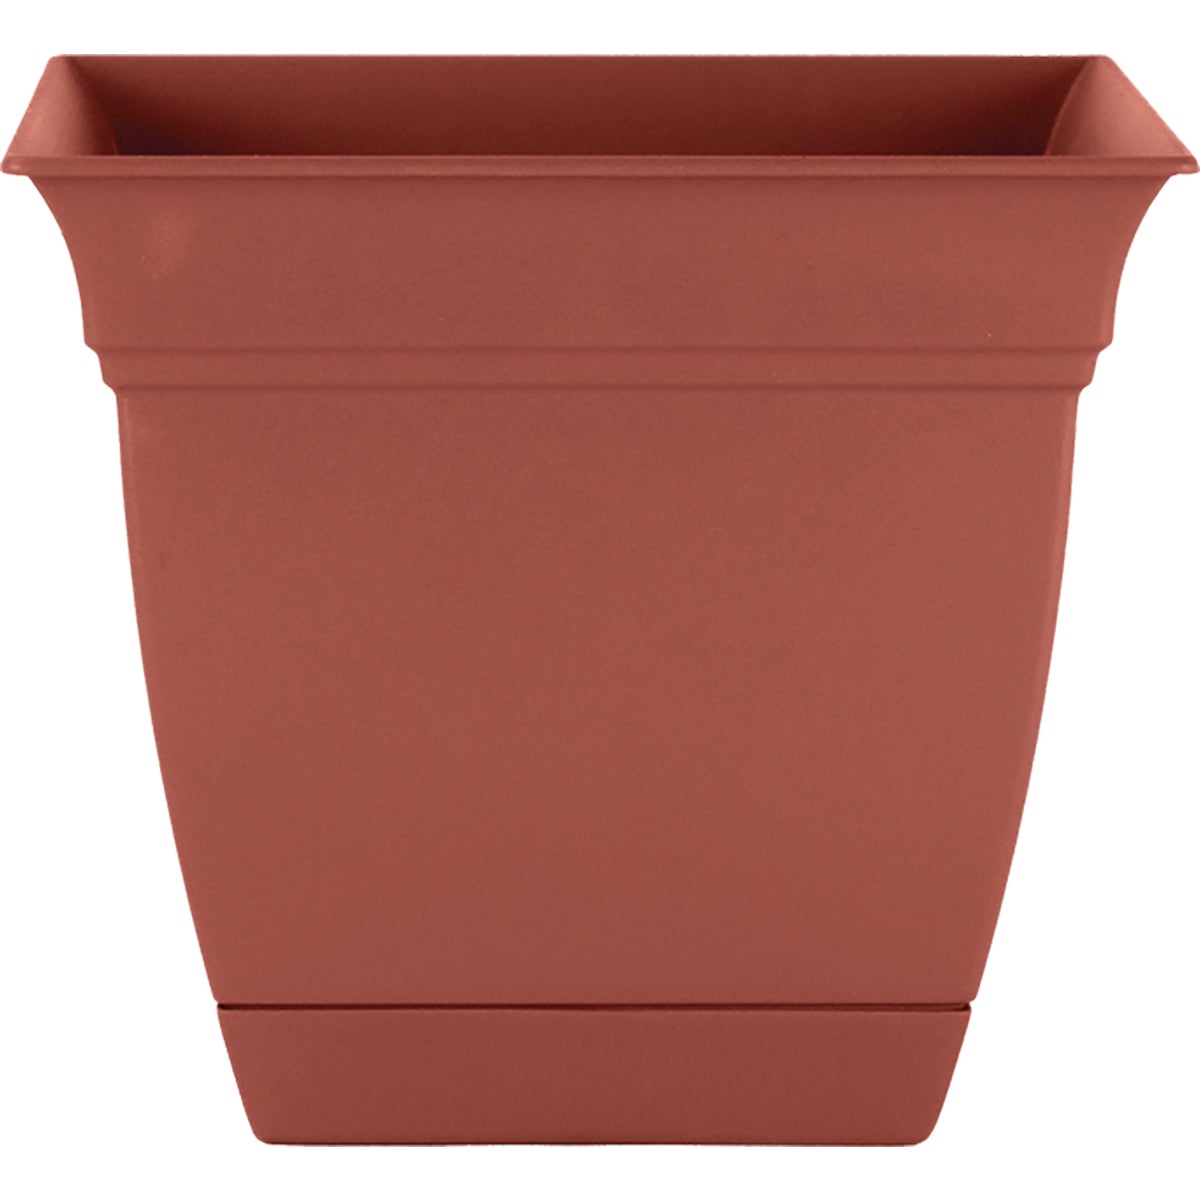 HC Companies Eclipse 10 In. x 10 In. x 8.75 In. Resin Clay Planter